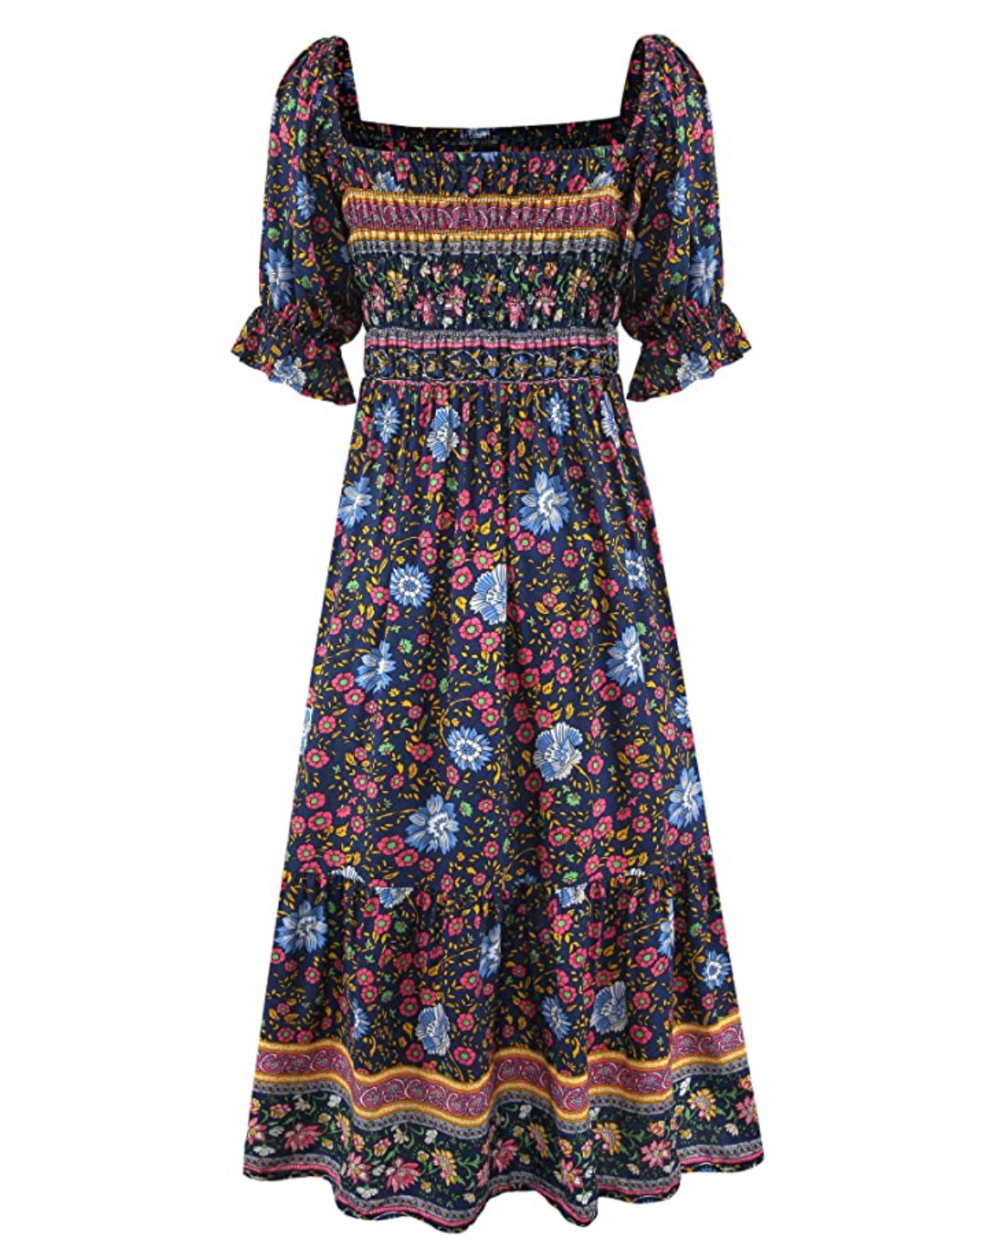 Uimlk Midi Dress Is a Boho Frock That You Can Wear Well Into Fall | Us ...